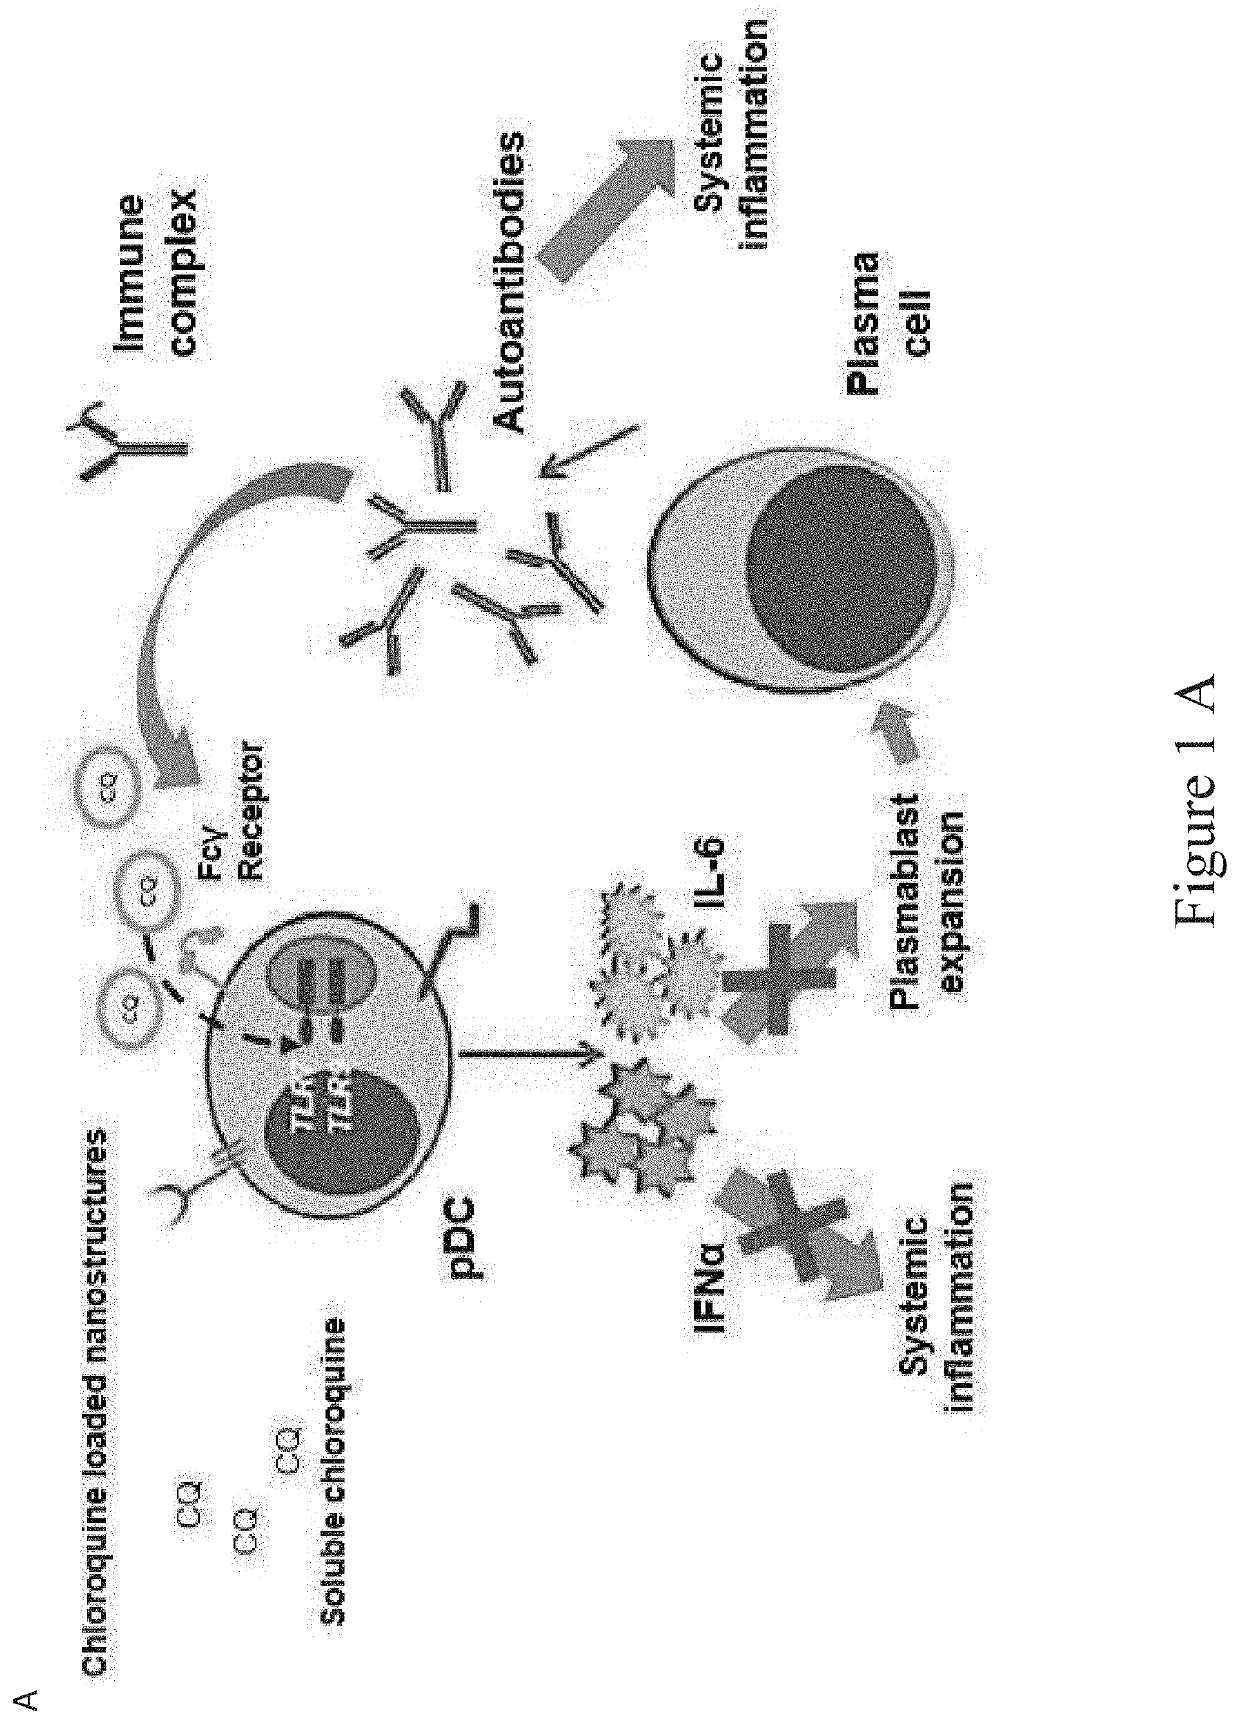 Self-assembled particles for targeted delivery of immunomudulators to treat autoimmunity and cancer